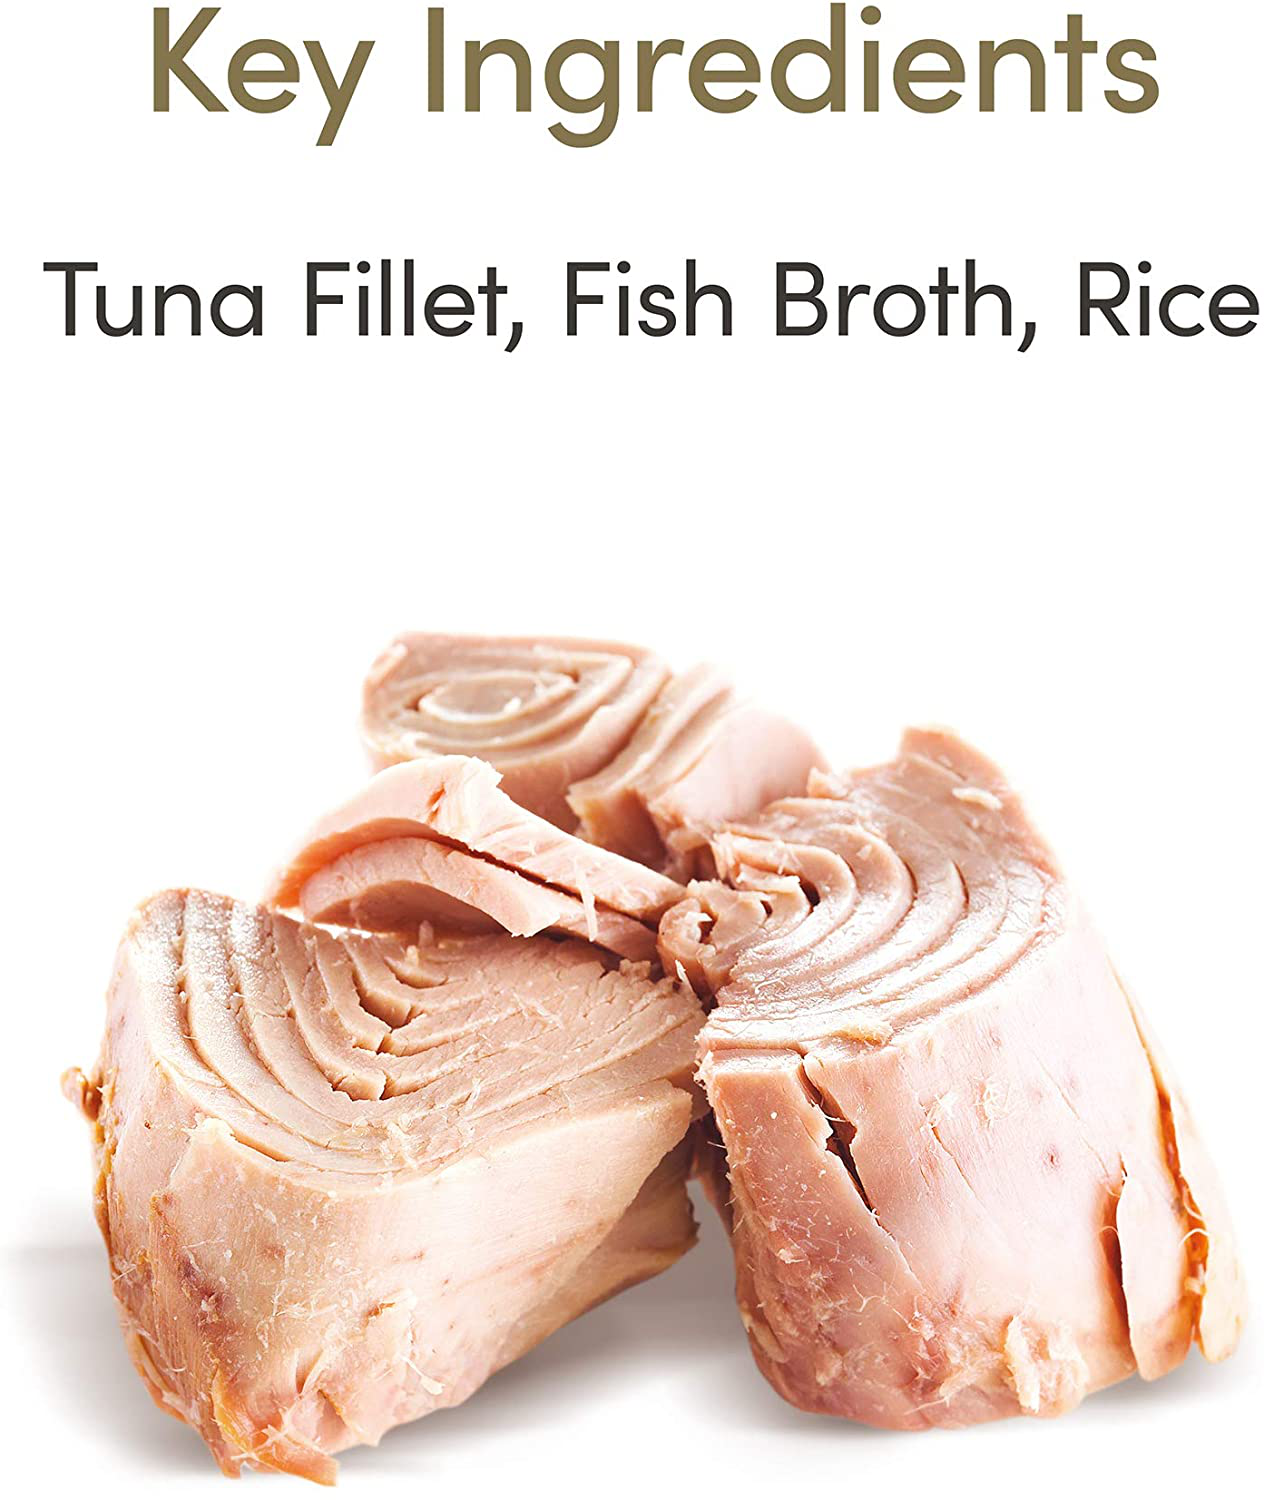 Applaws Natural Tuna Fillet in Broth Wet Cat Food